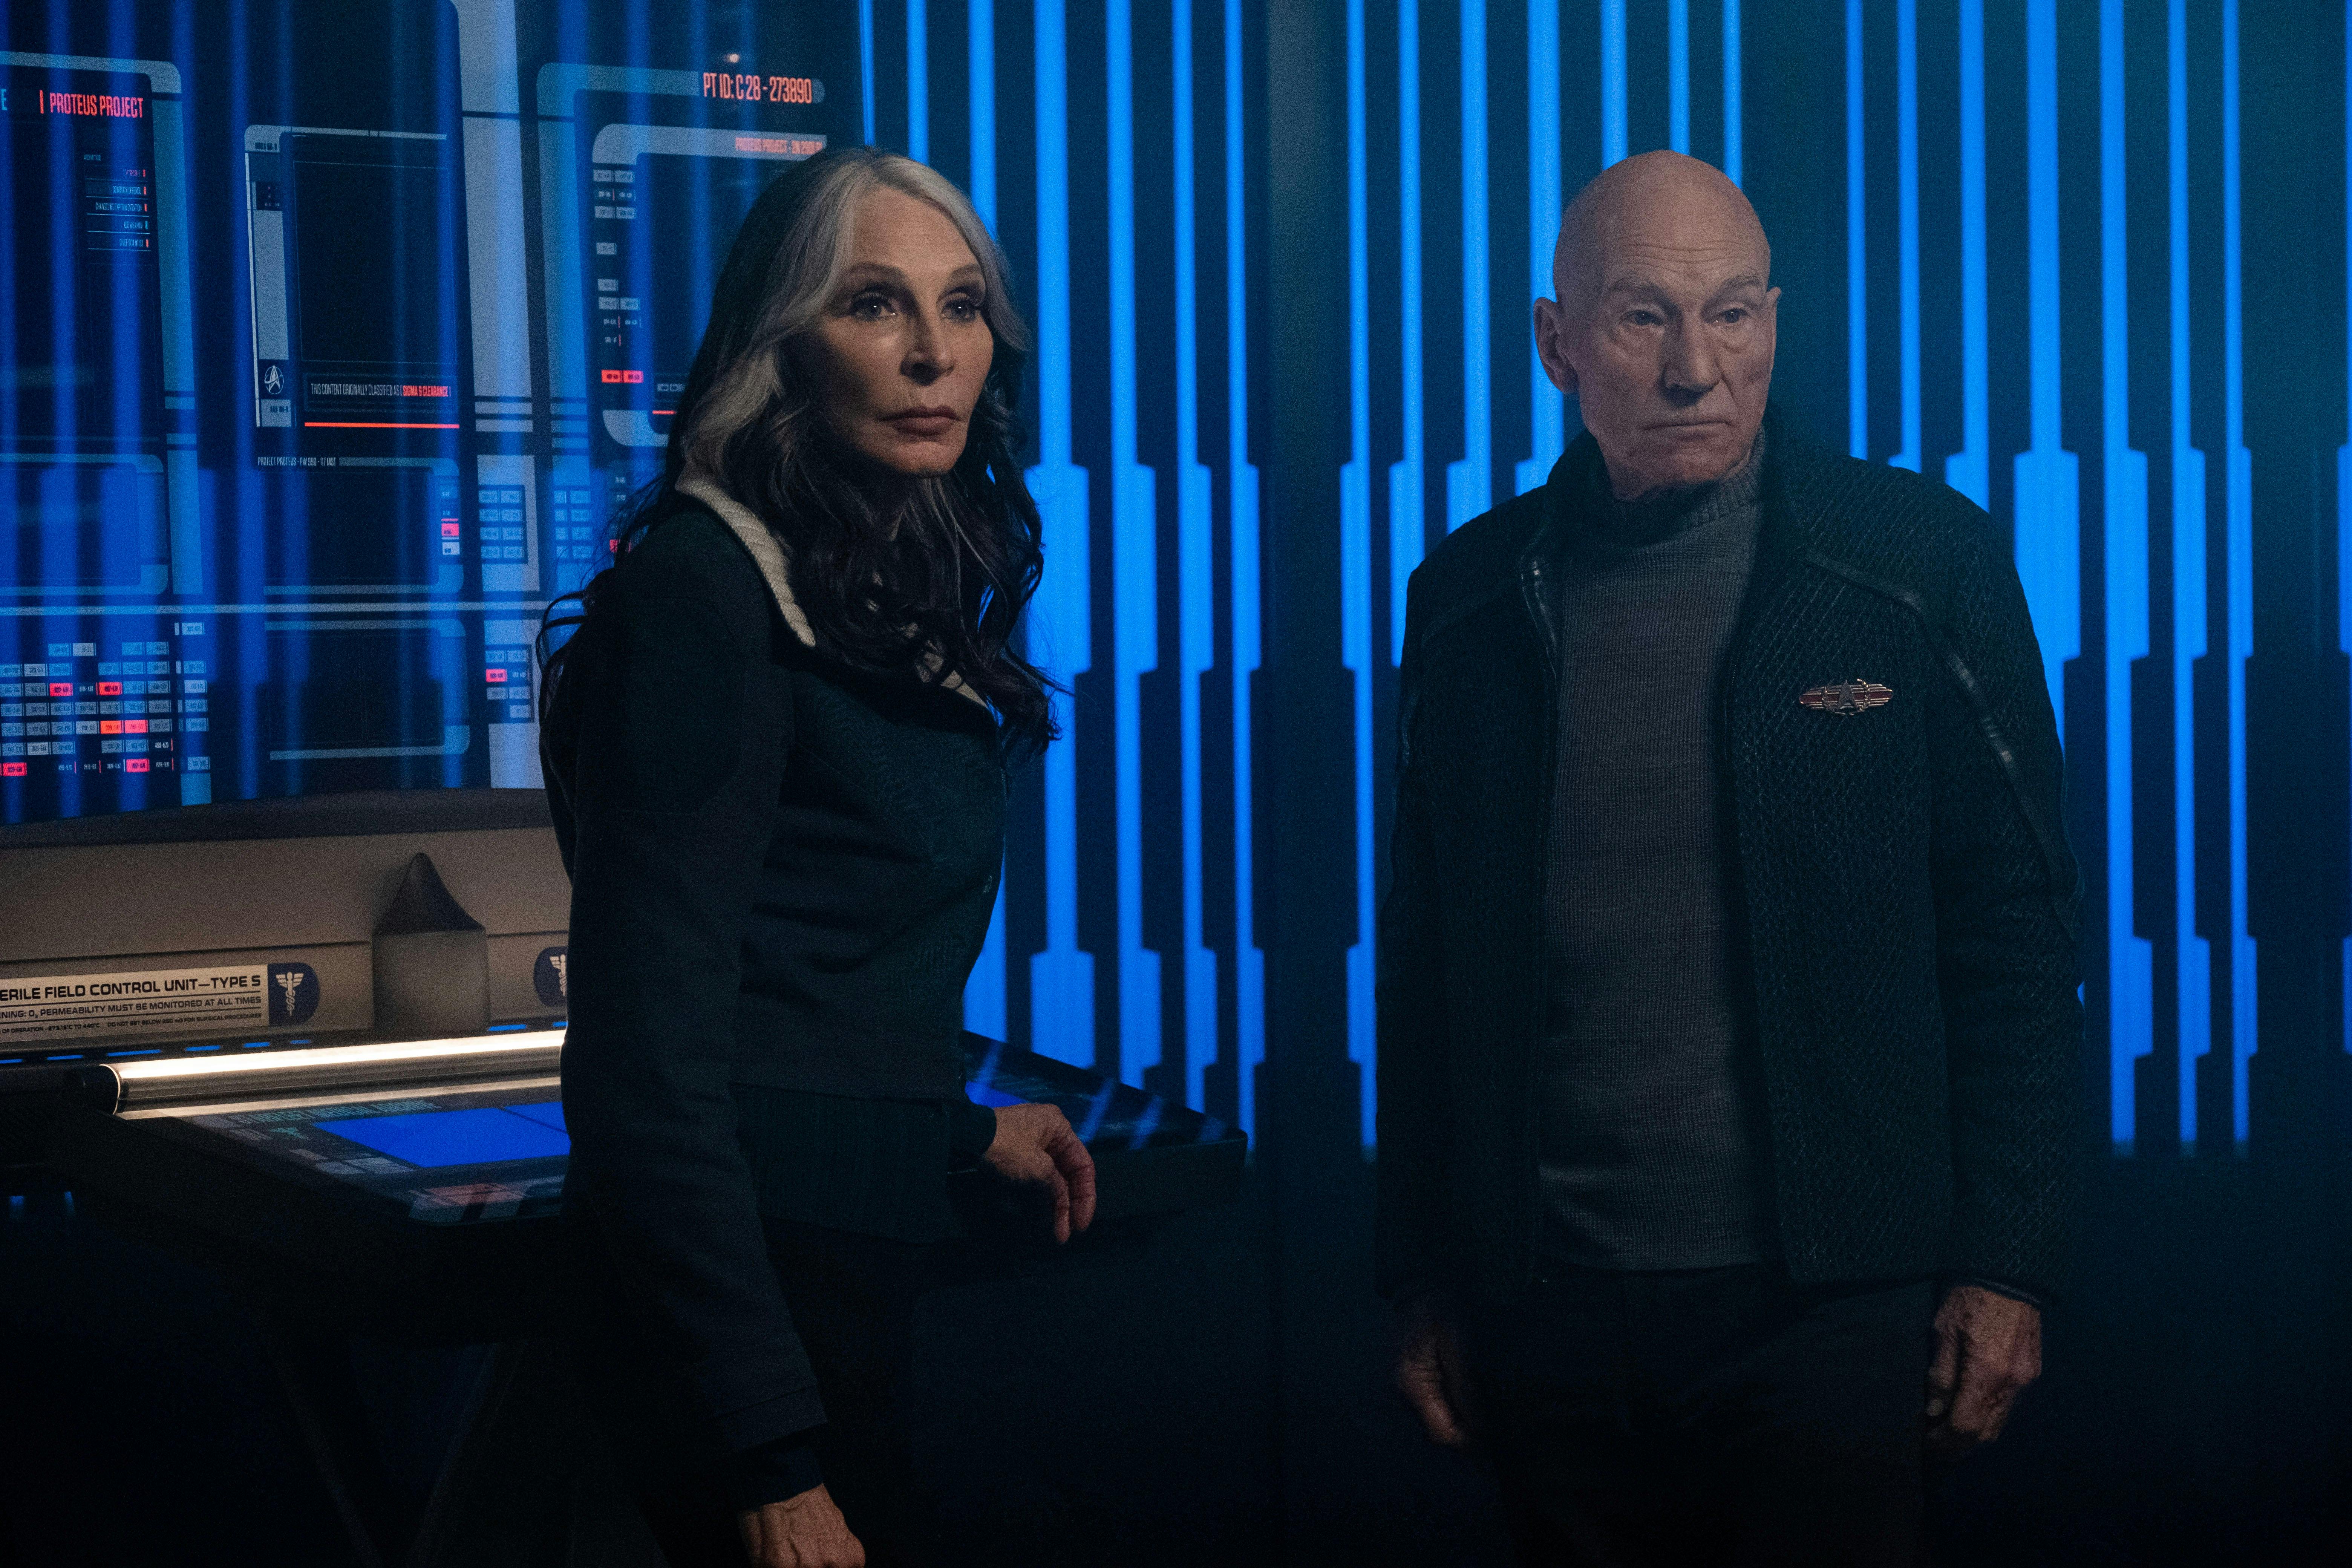 In the Titan's Sickbay, Dr. Beverly Crusher and Picard pause and look ahead of them